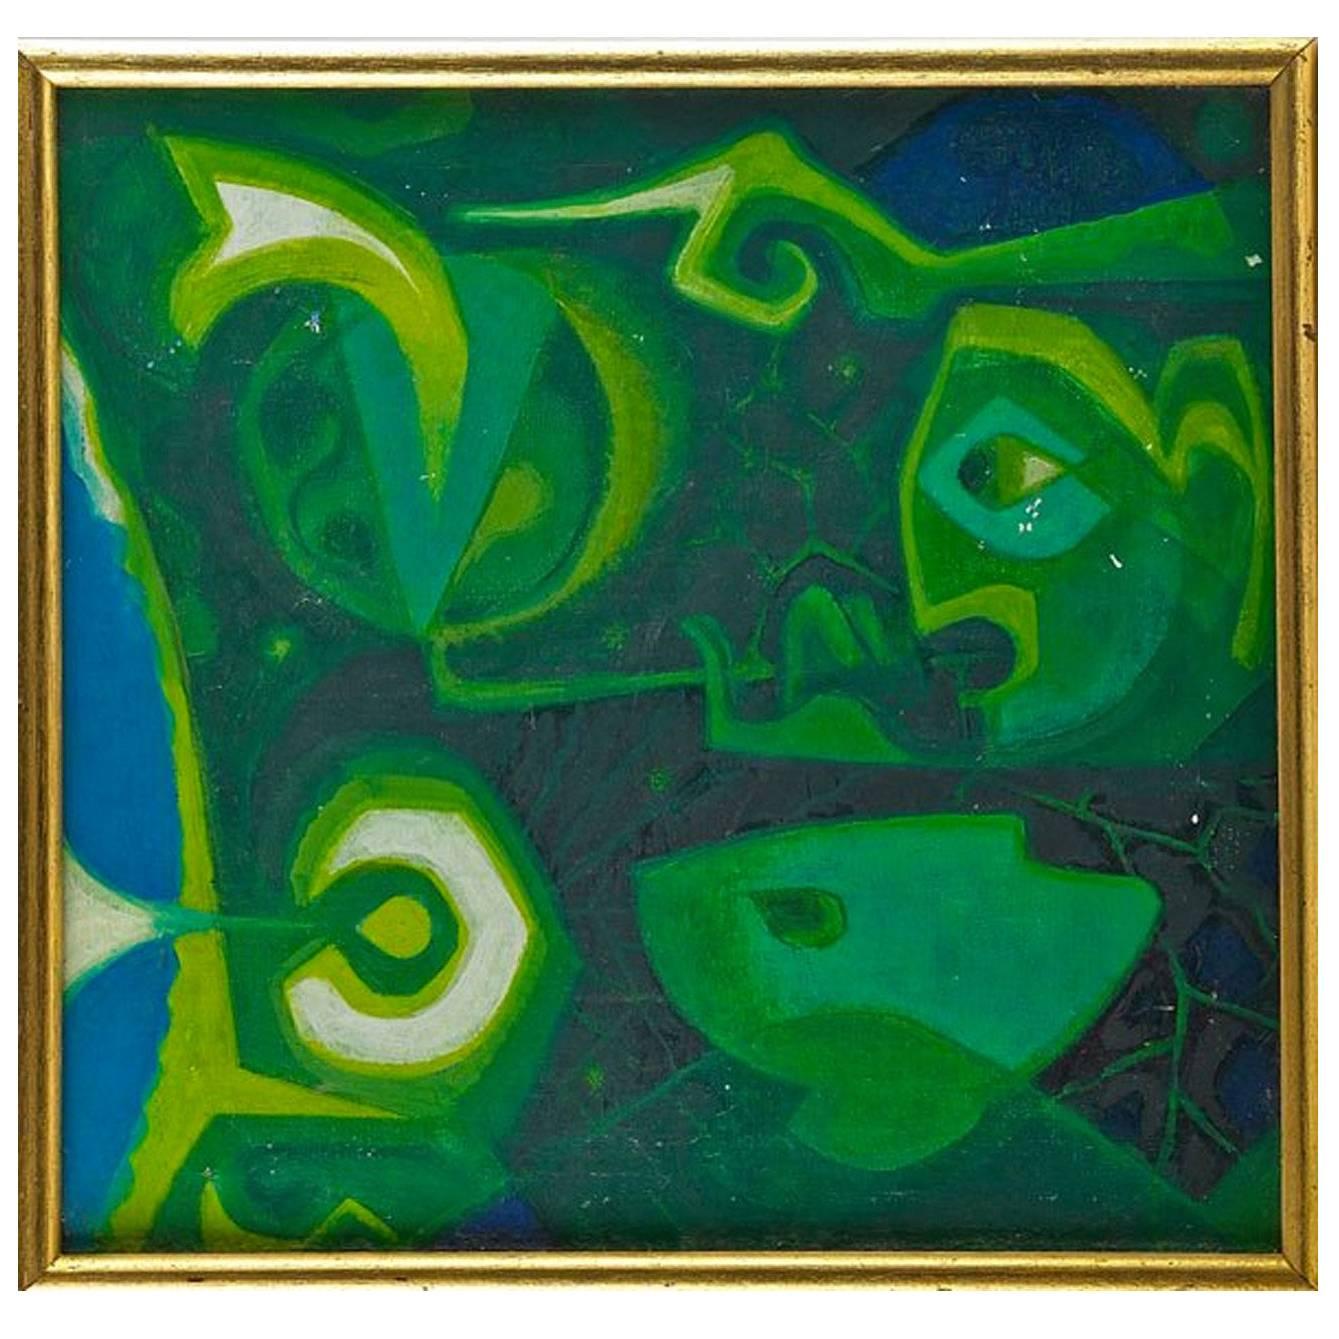 Original Tommi Parzinger Emerald Green Oil Painting For Sale